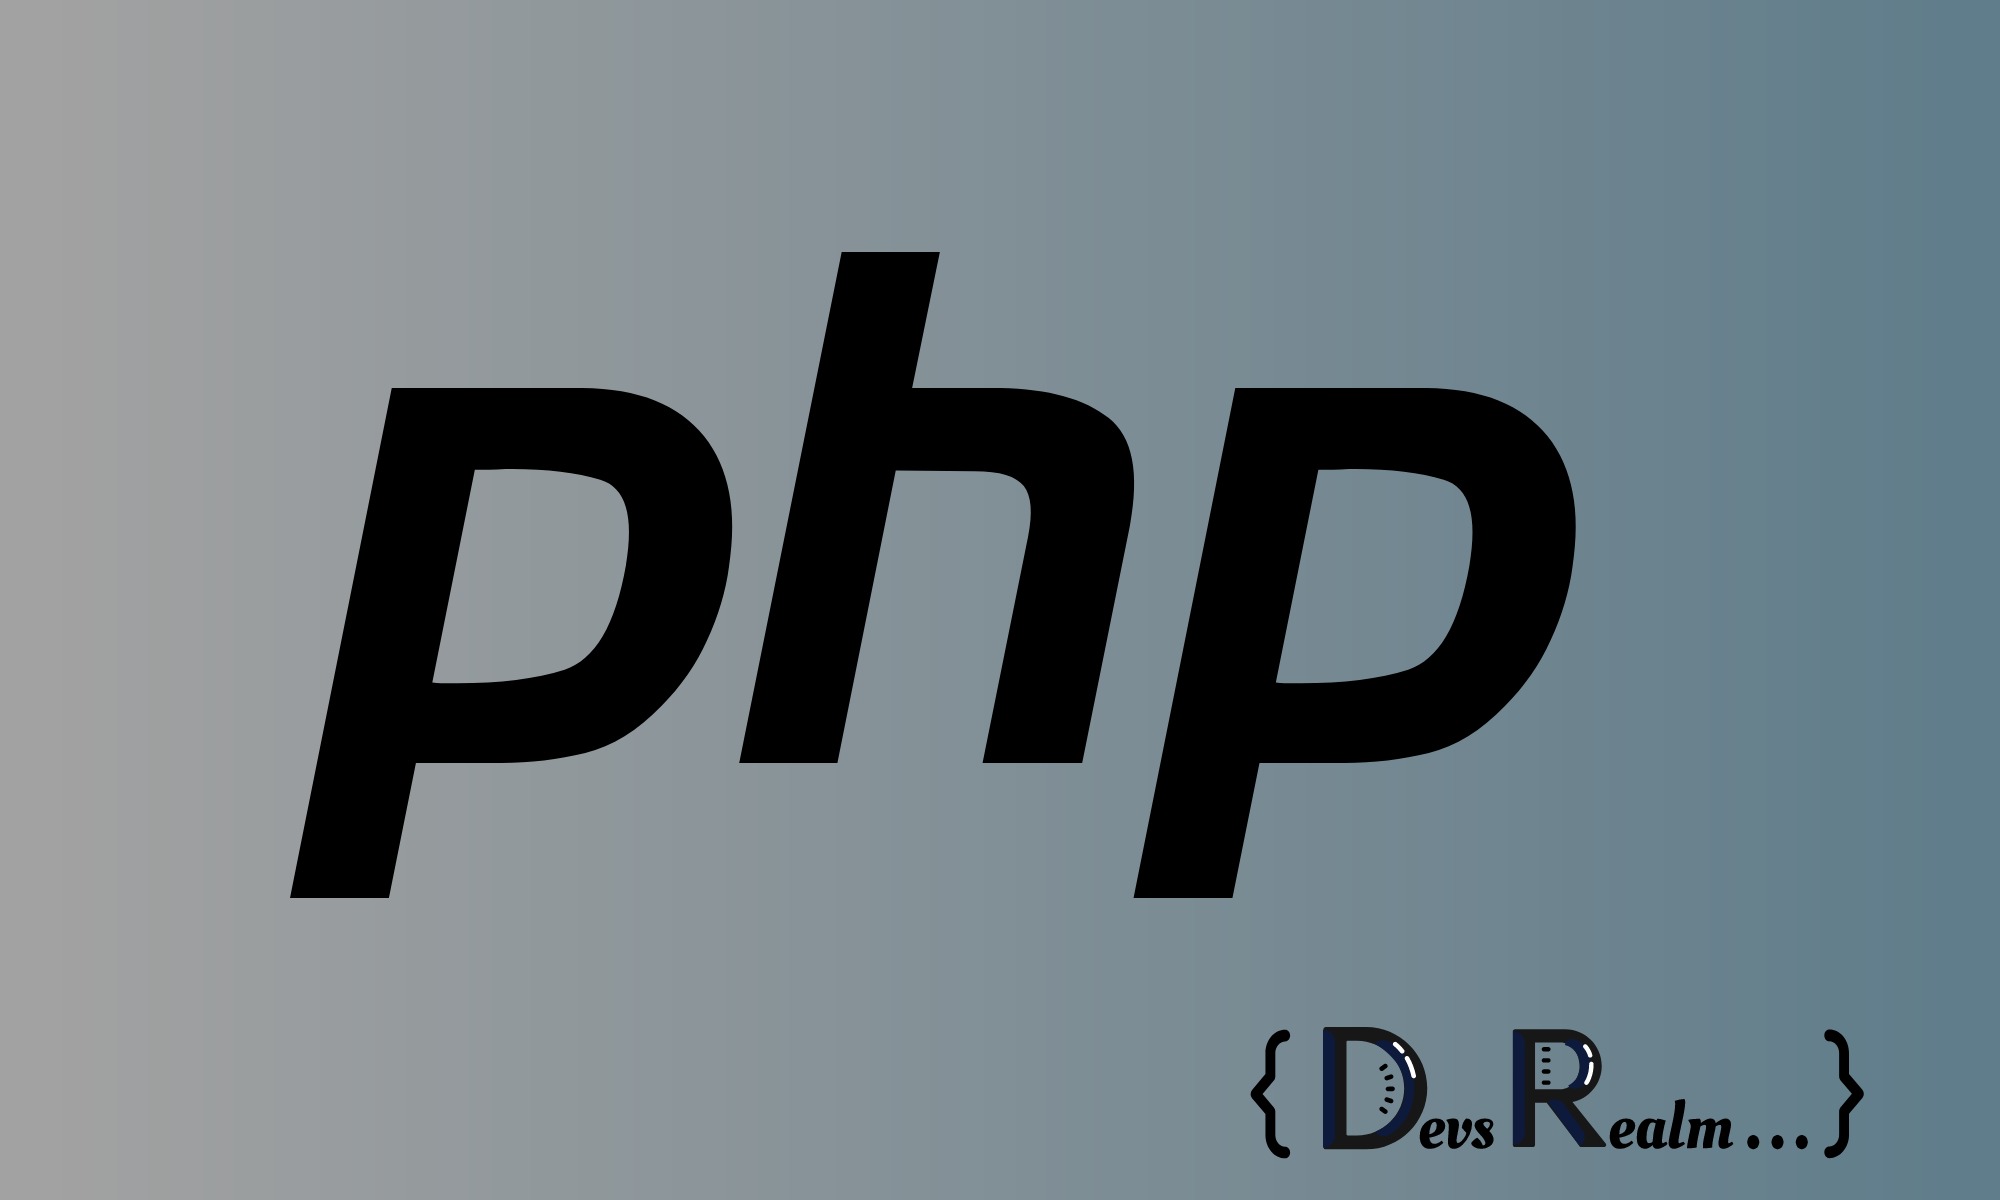 Creating a Tiny PHP MVC Framework From Scratch